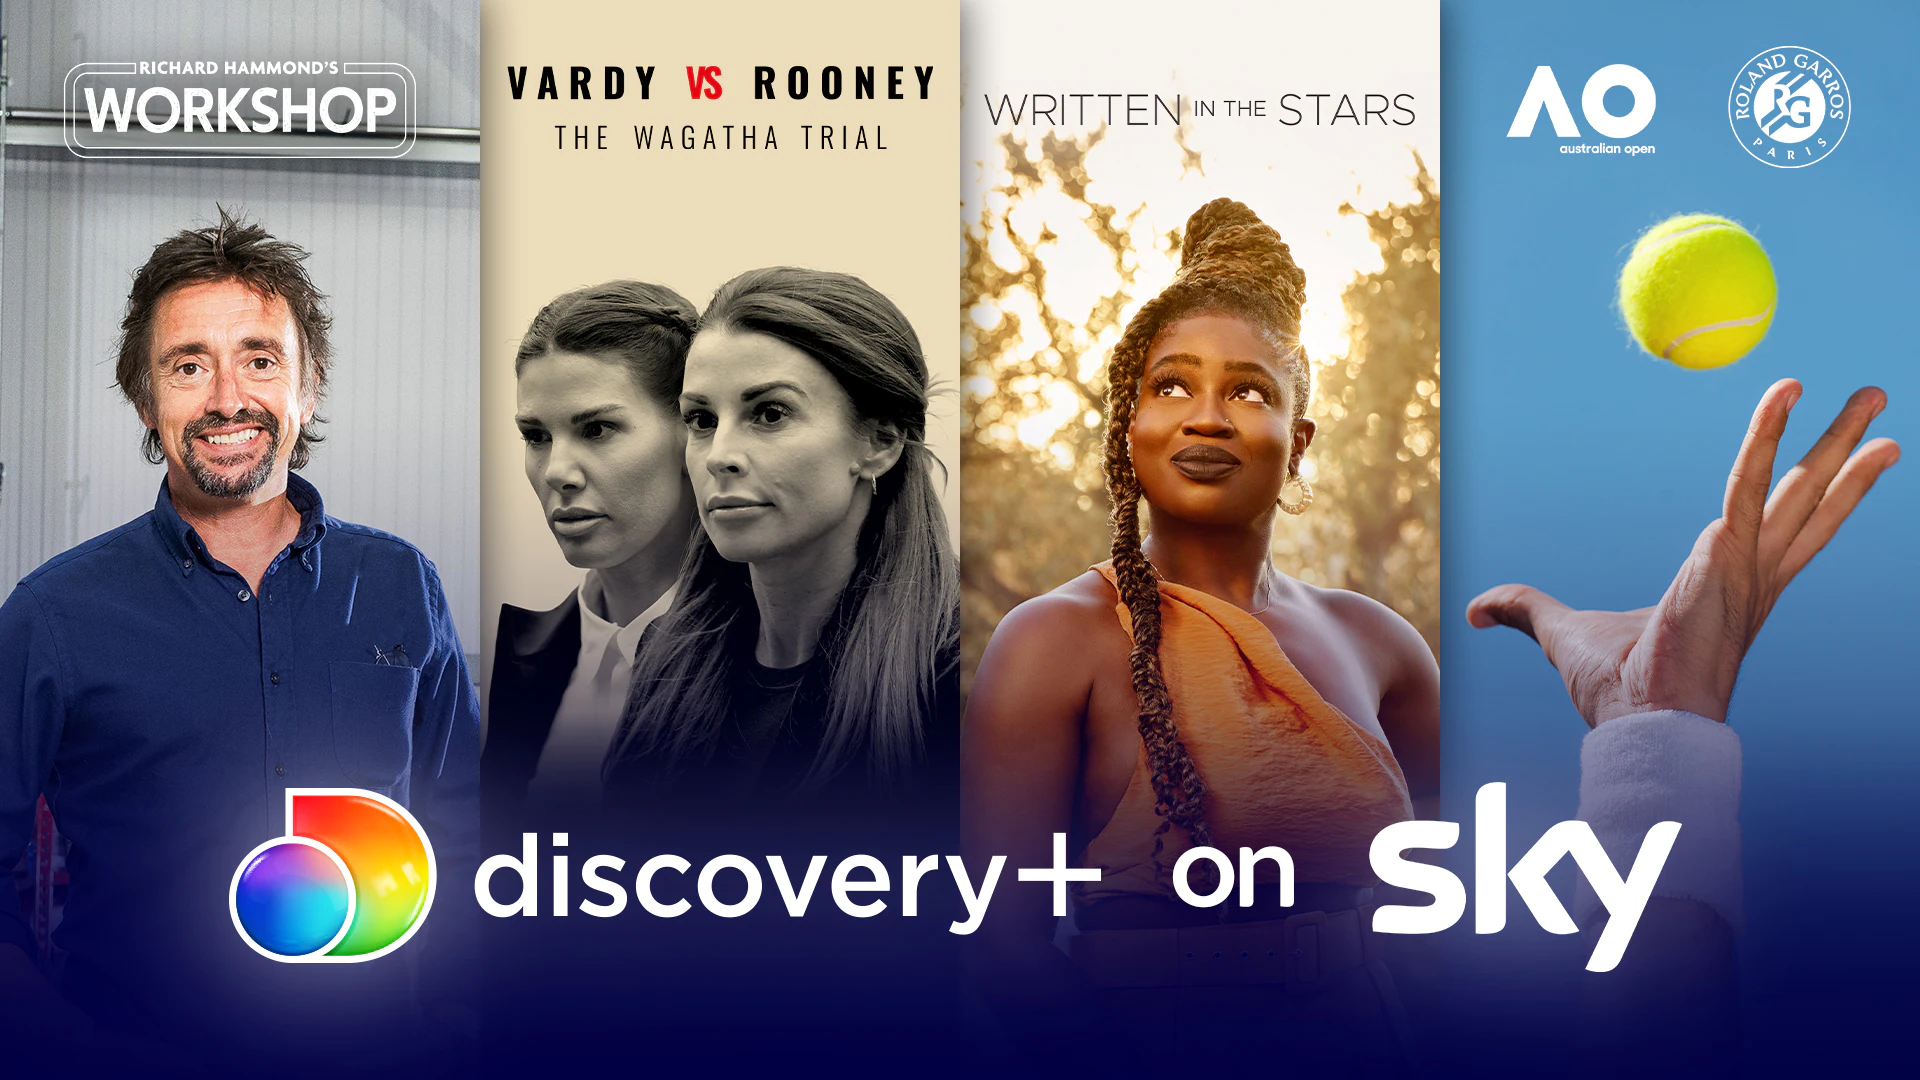 Discovery+ is now included in Sky TV packages